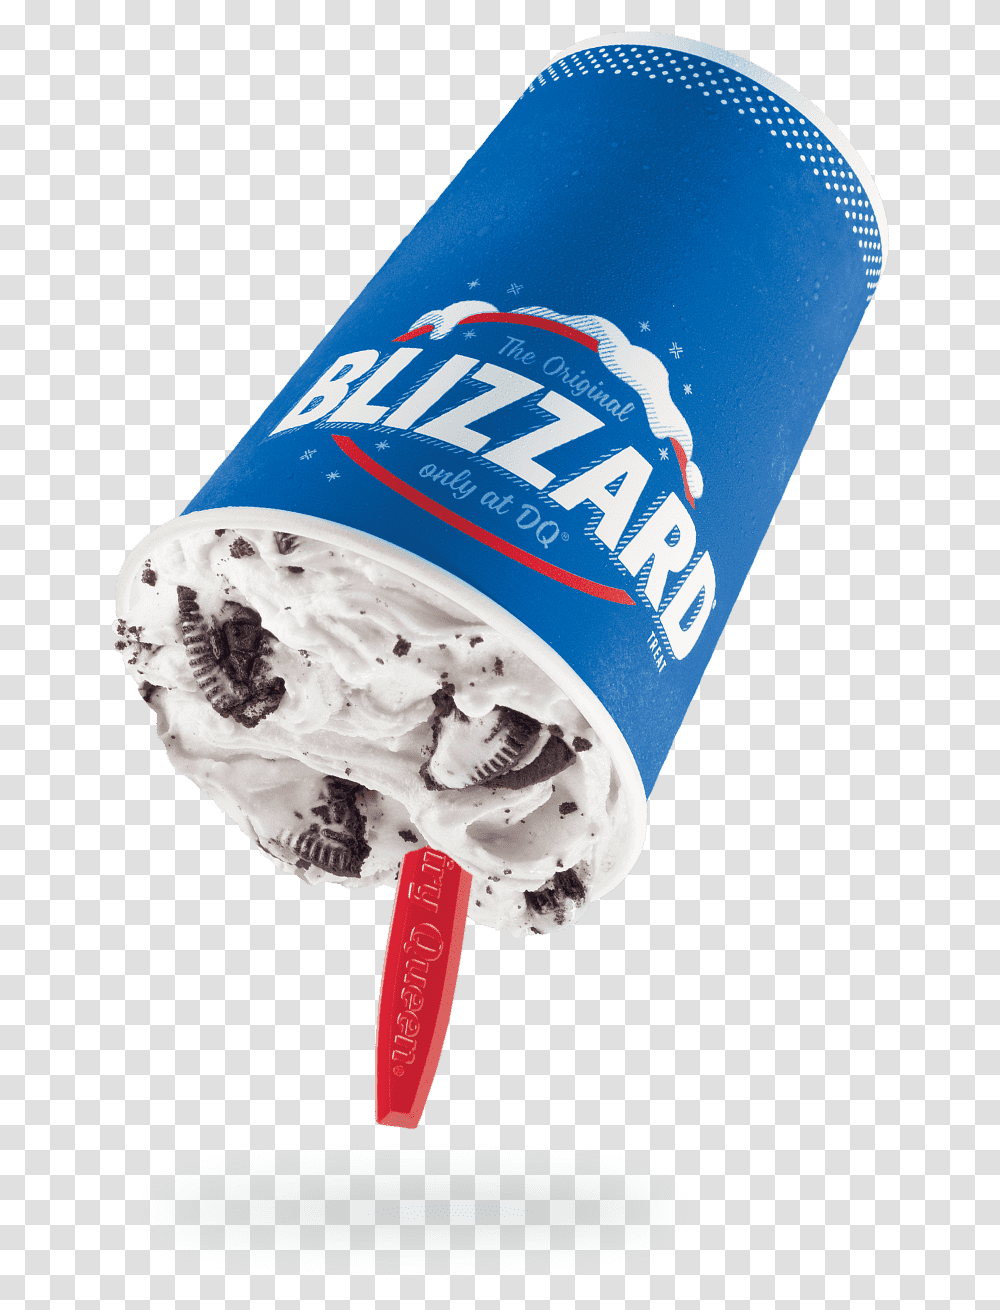 Oreo Cookie Blizzard Treat Dairy Queen Menu Dairy Queen Oreo Blizzard, Bottle, Cylinder, Egg, Food Transparent Png